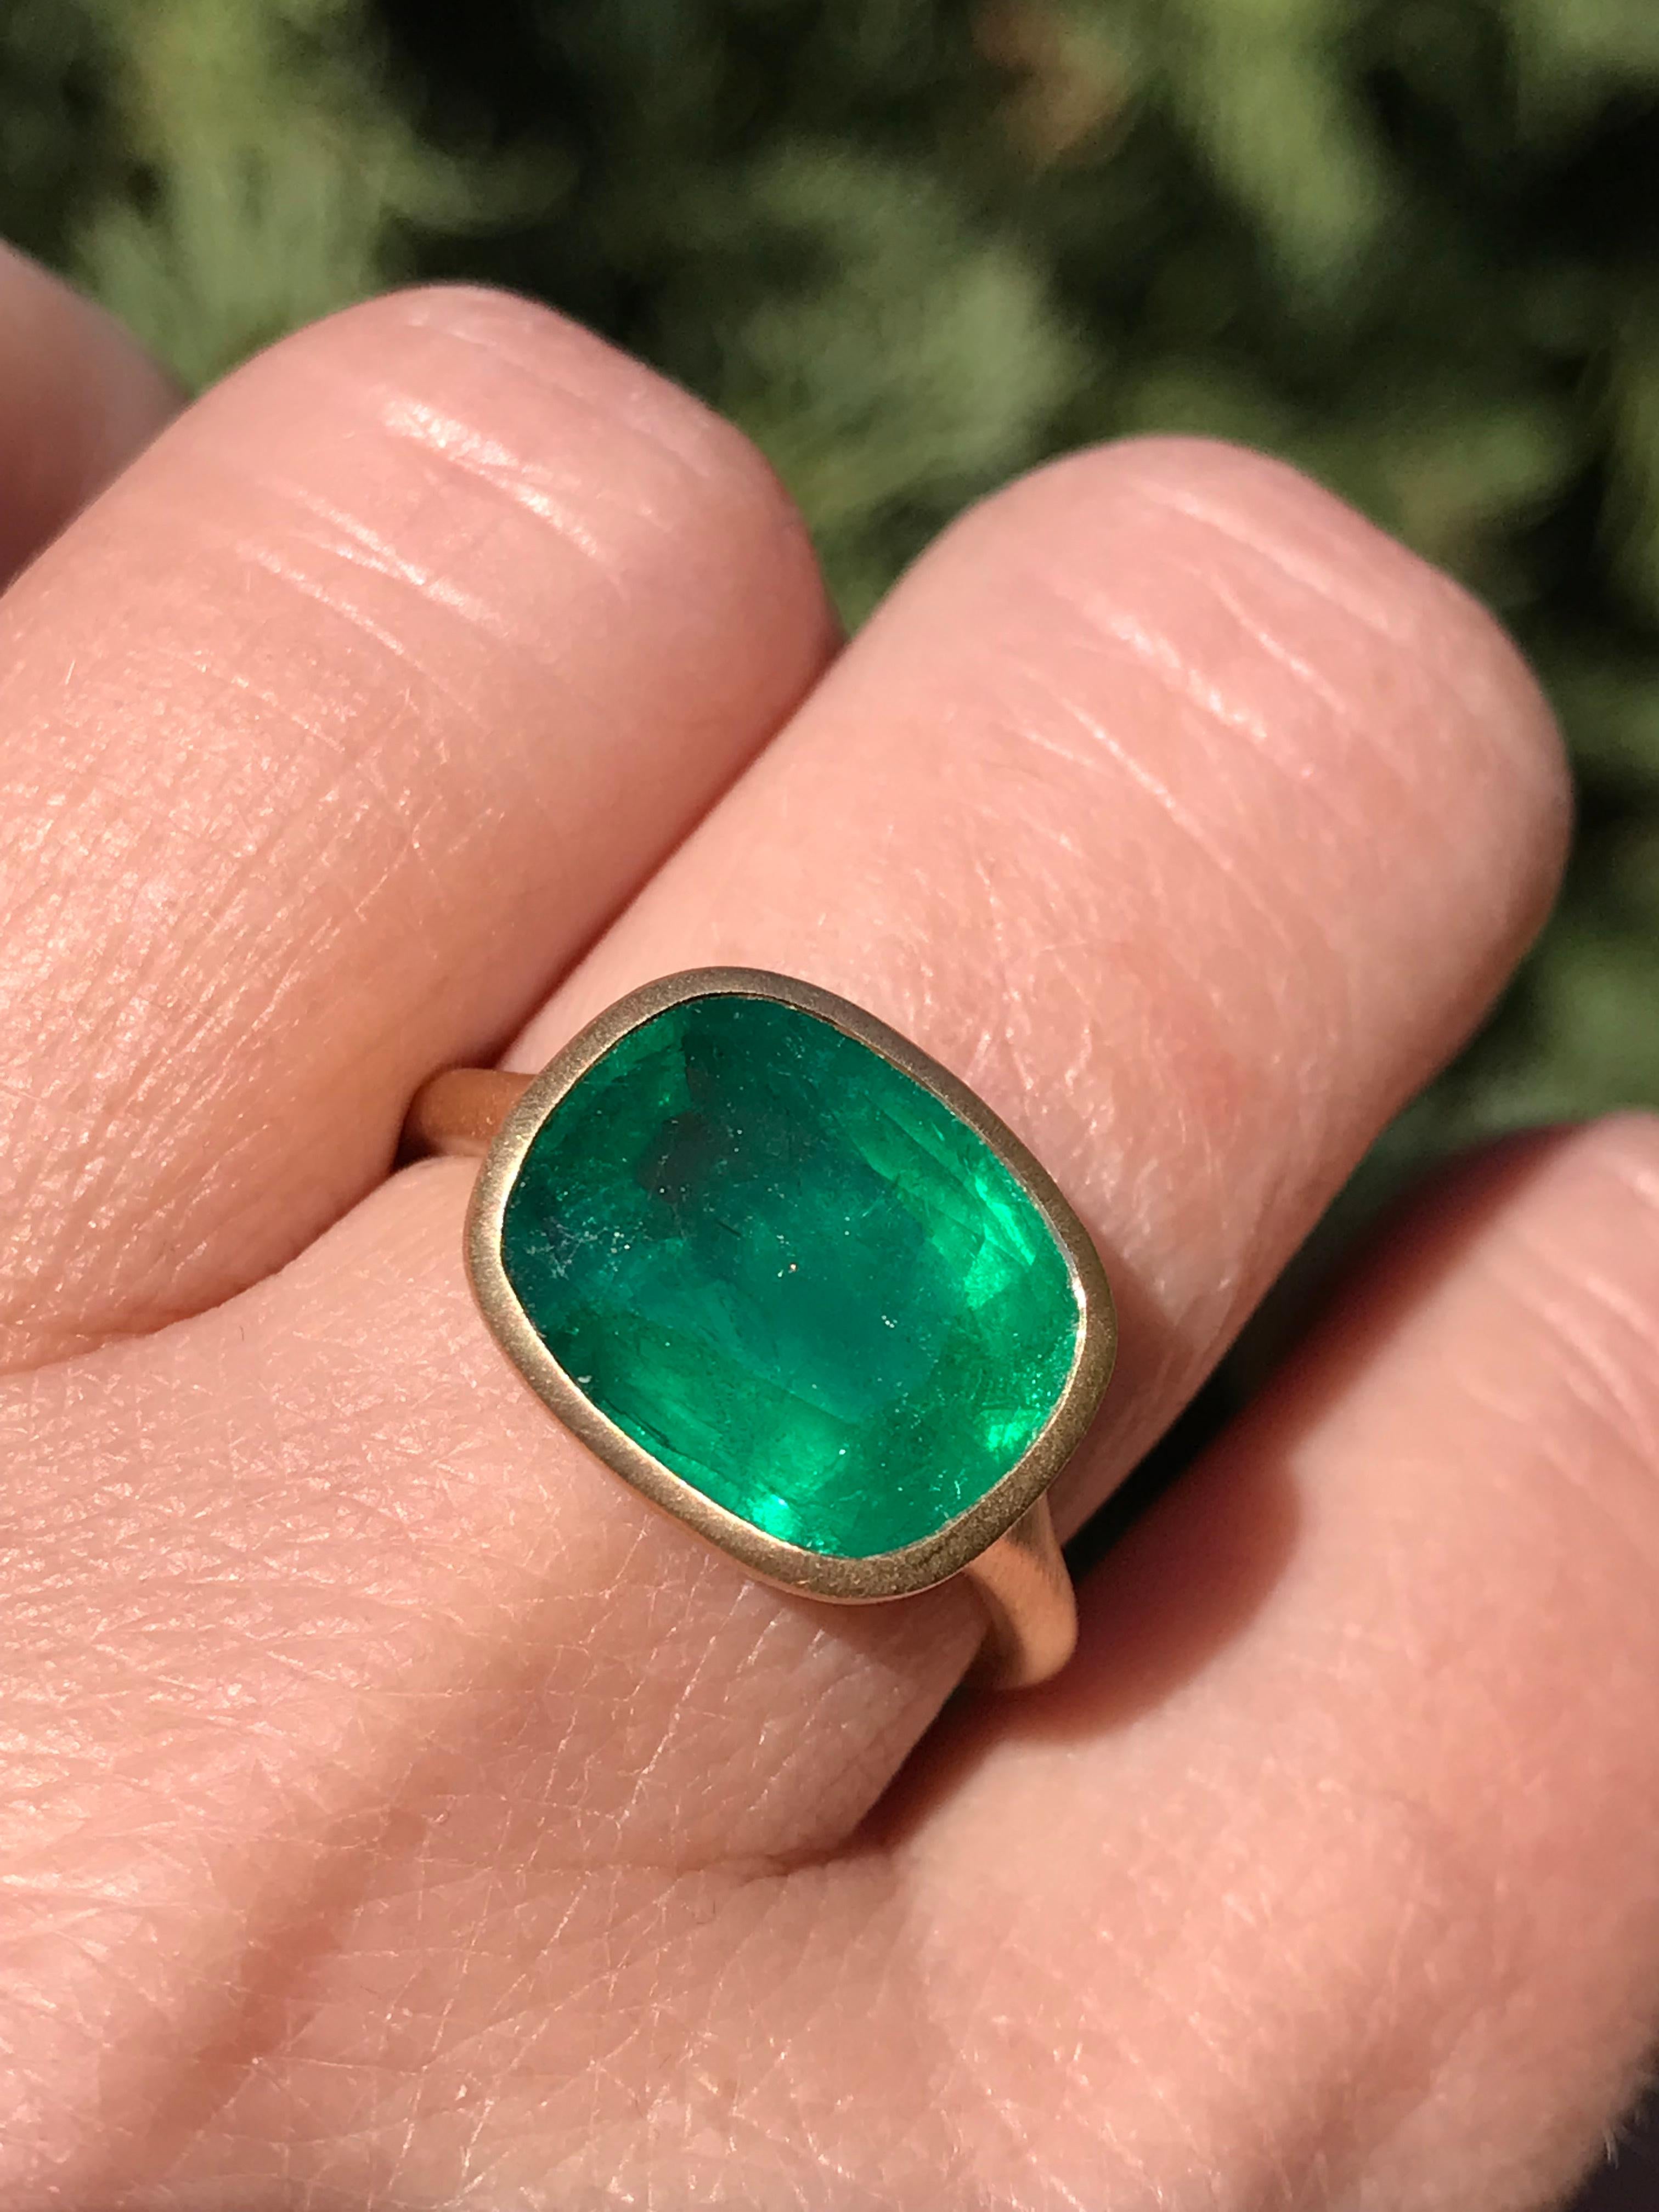 Dalben design One of a Kind 18k yellow gold satin finishing ring with a 4,9 carat bezel-set cushion cut emerald. 
Ring size 6 3/4  USA - EU 54 re-sizable to most finger sizes. 
Bezel stone dimensions :
width 14,26 mm
height 11,6 mm
The ring has been